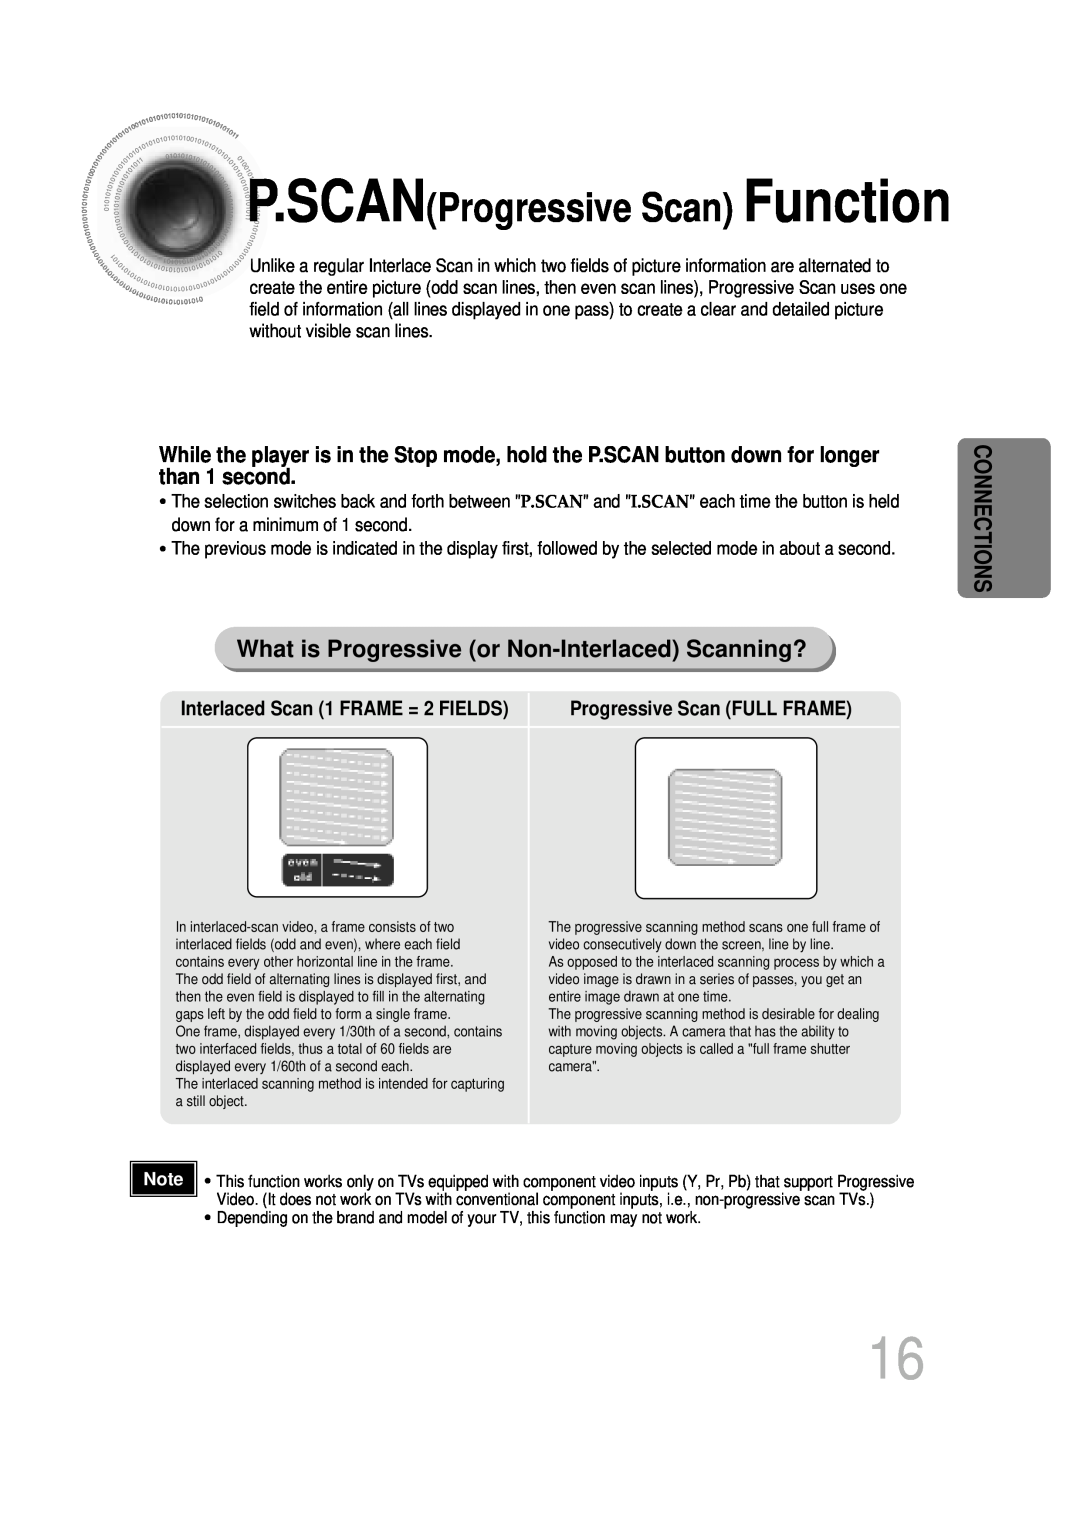 Samsung HT-DB600 instruction manual P.SCANProgressive Scan Function, Interlaced Scan 1 FRAME = 2 FIELDS, Connections 